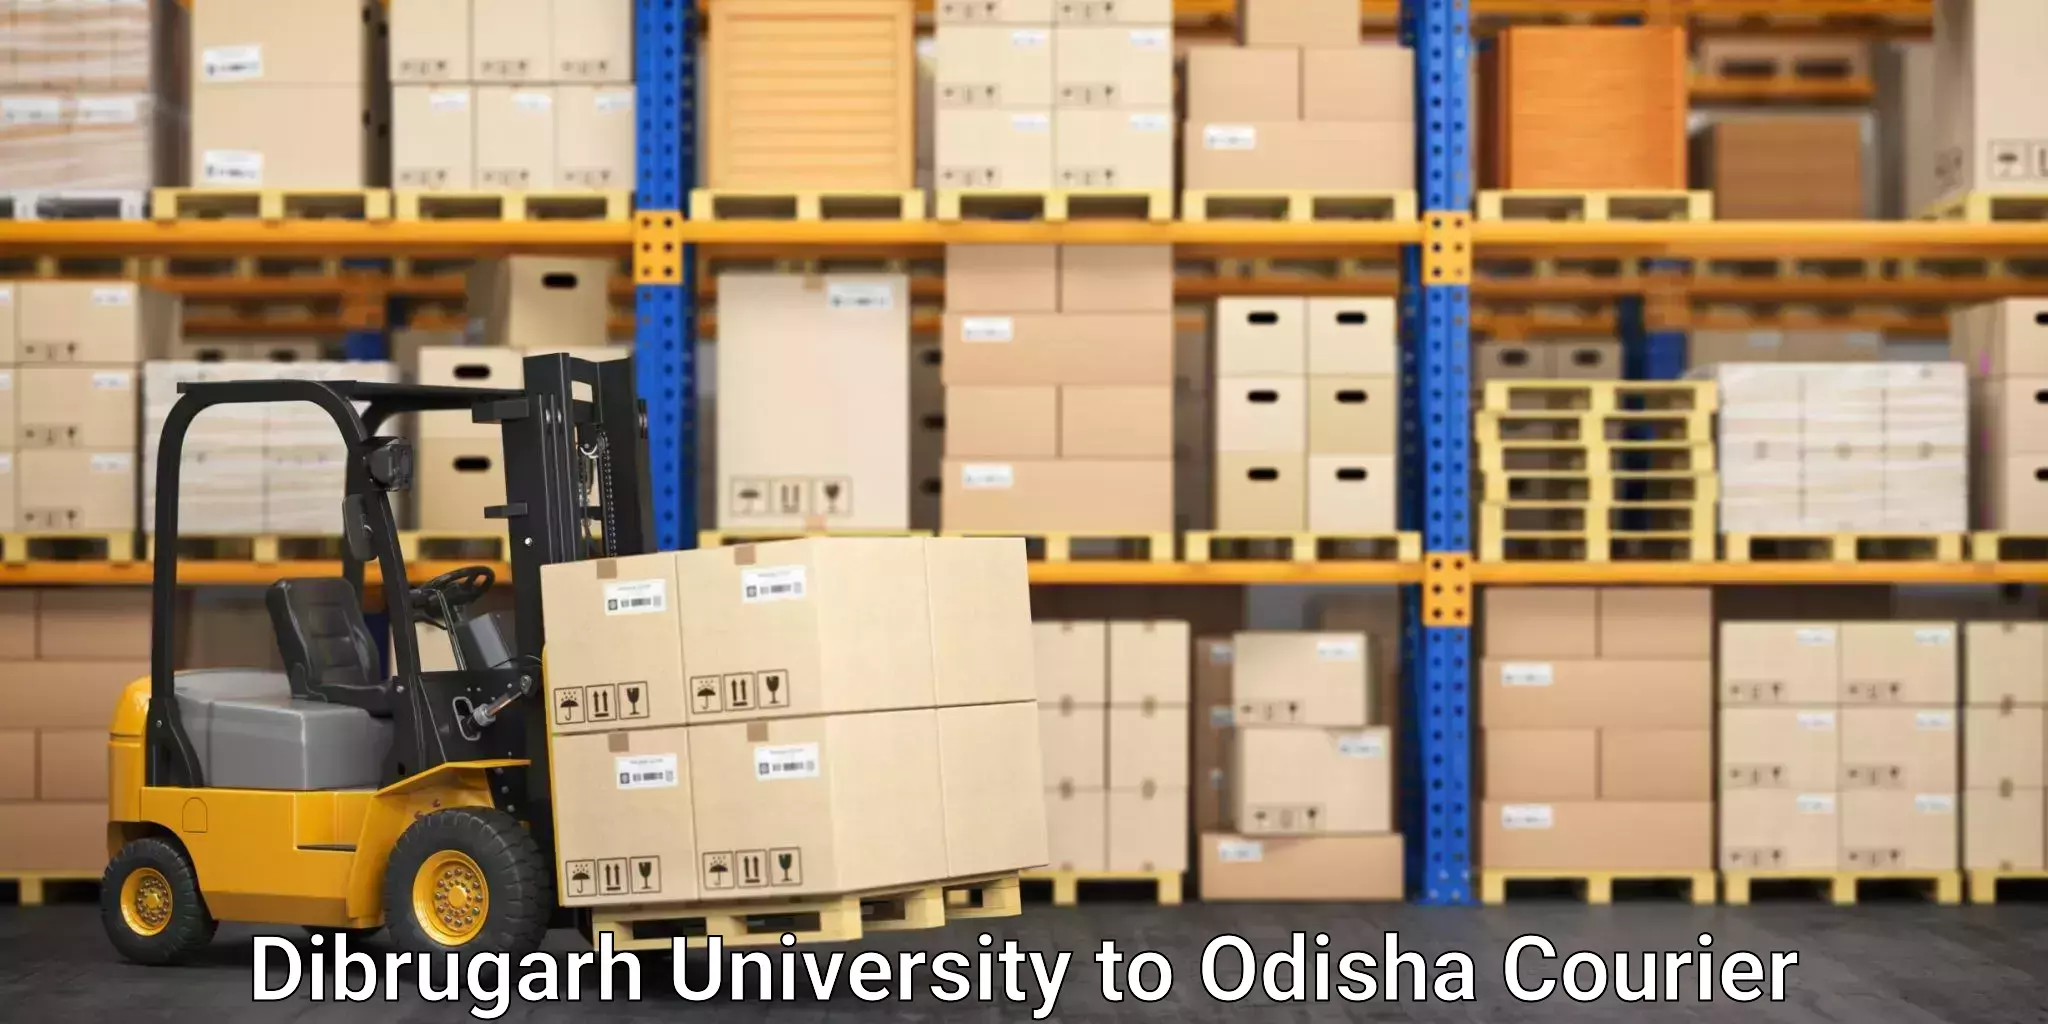 Package tracking in Dibrugarh University to Kendrapara